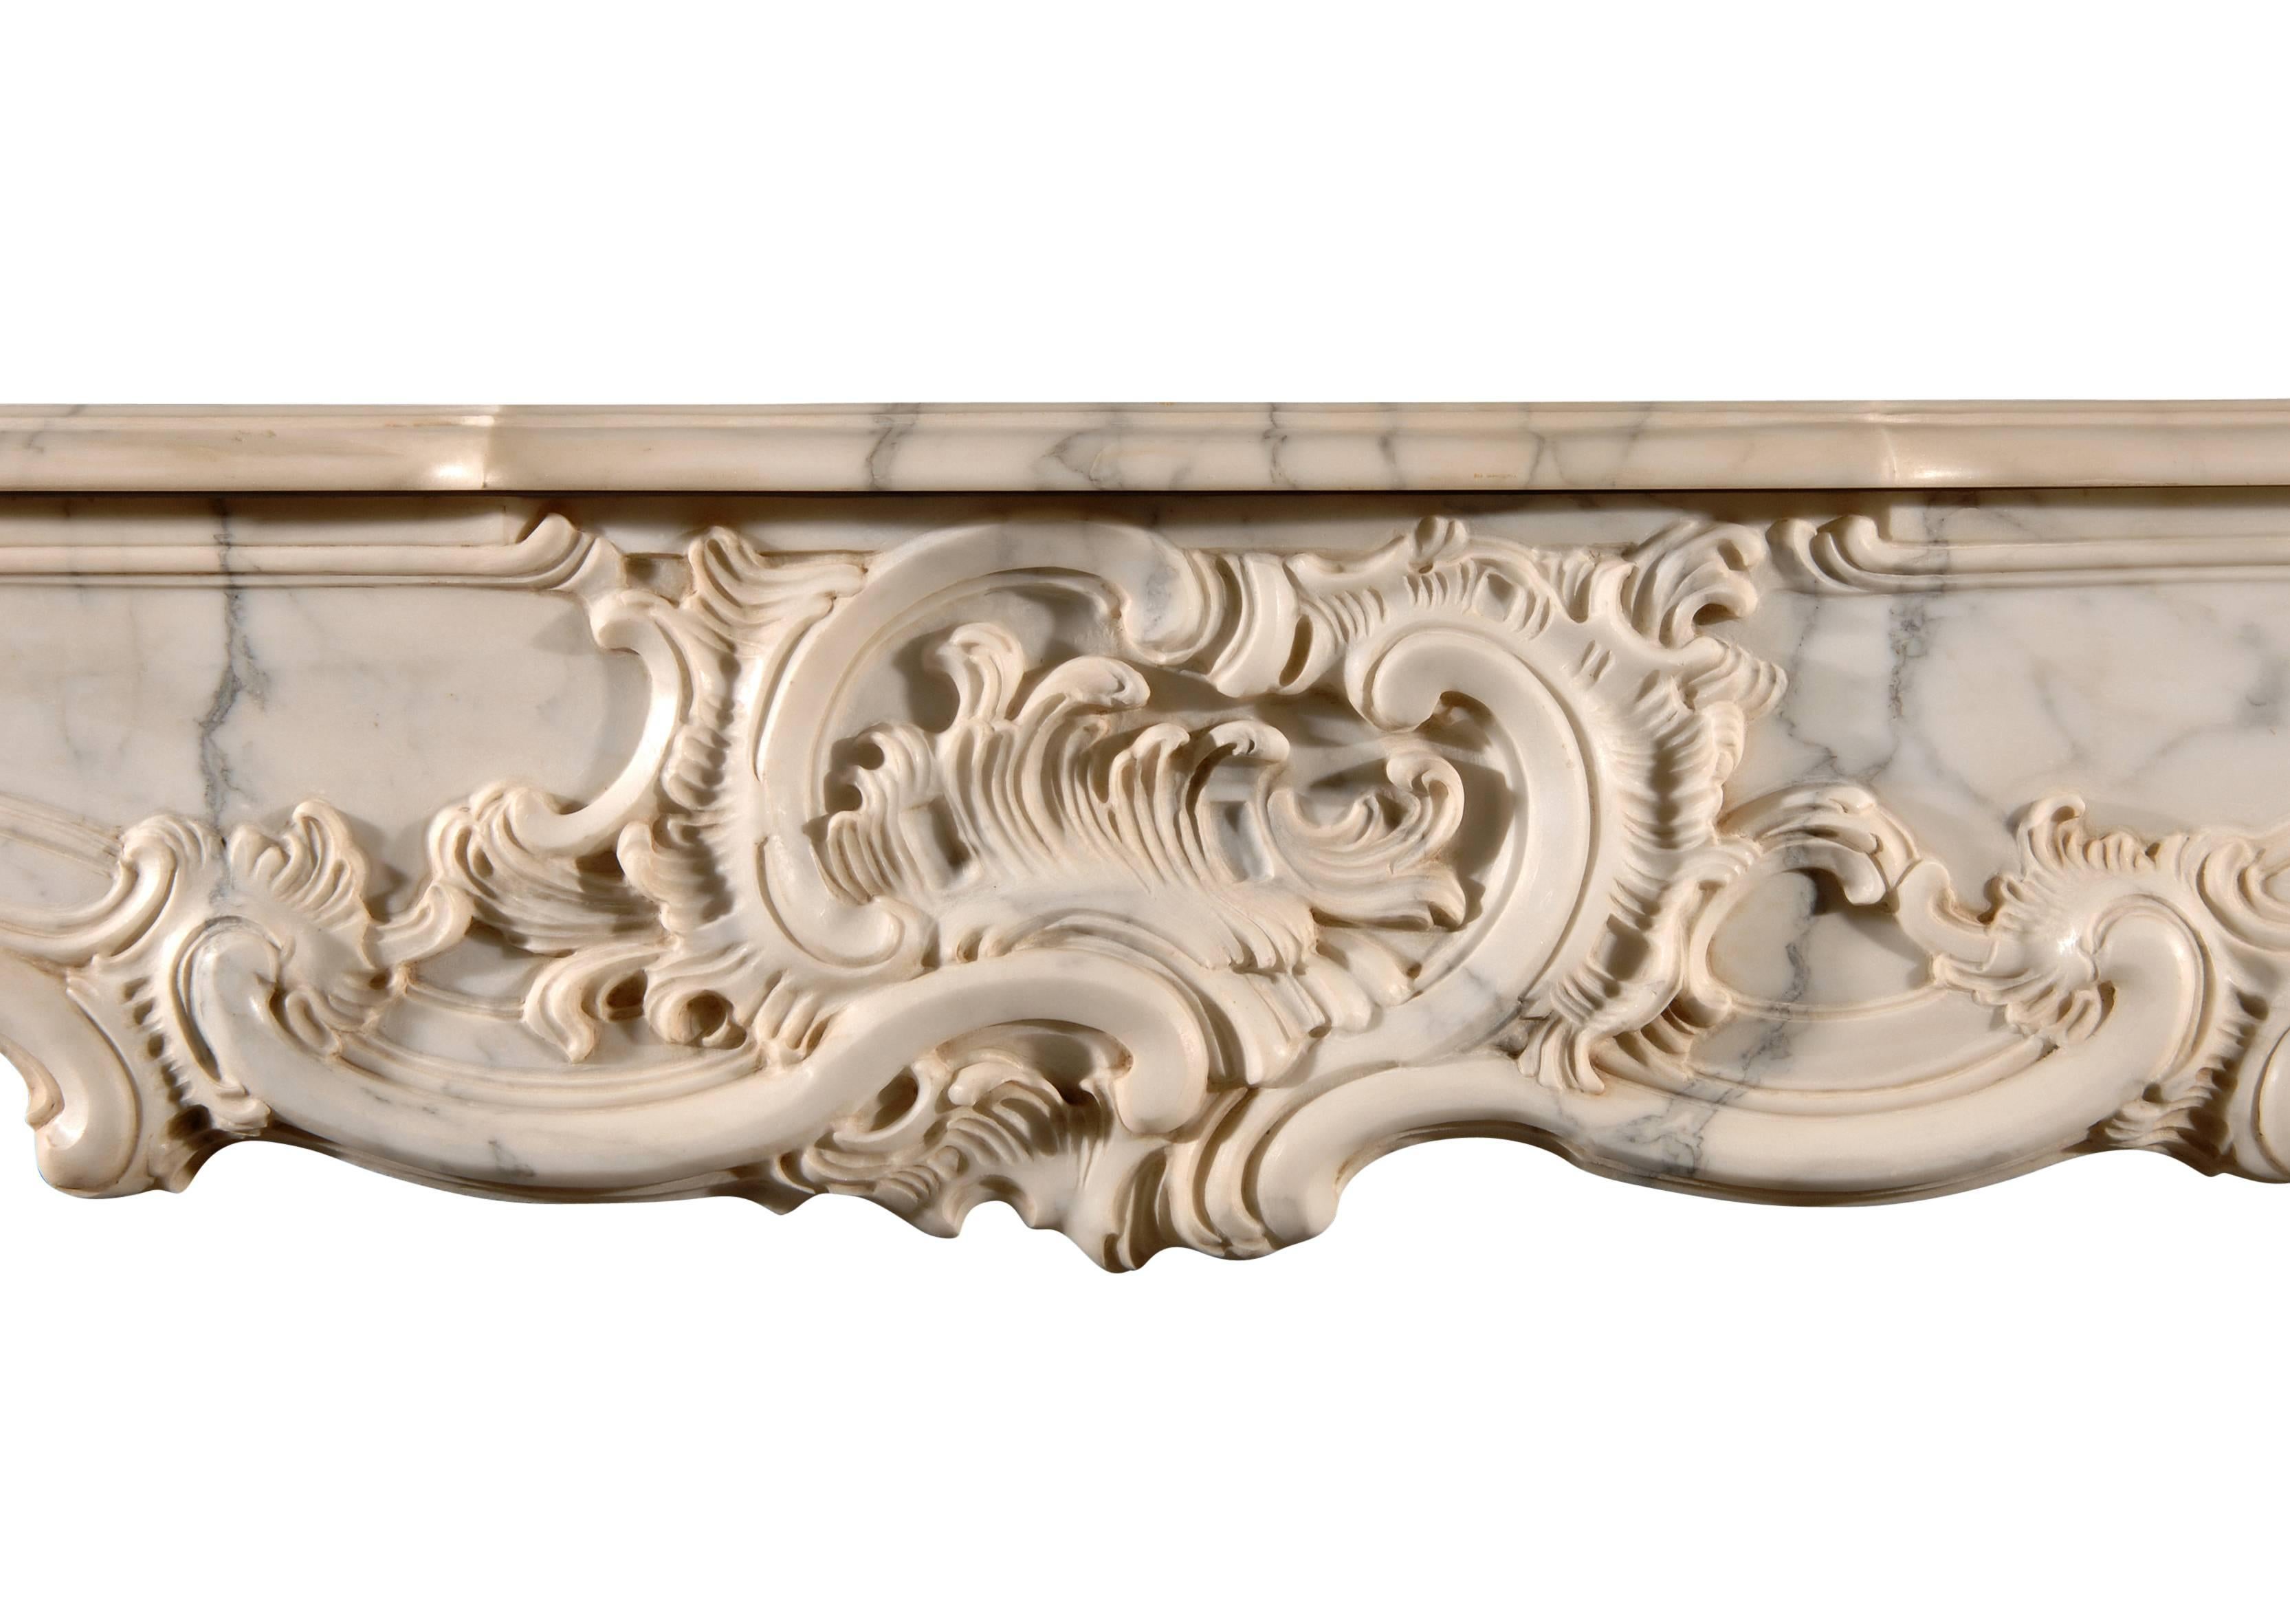 A French Provençale style Arabescato marble fireplace, with ornately carved Rococo frieze and jambs of scrolls and foliage. Unusually high for a French fireplace.

Measures: 
Shelf Width:	1770 mm      	69 5/8 in
Overall Height:	1405 mm      	55 3/8